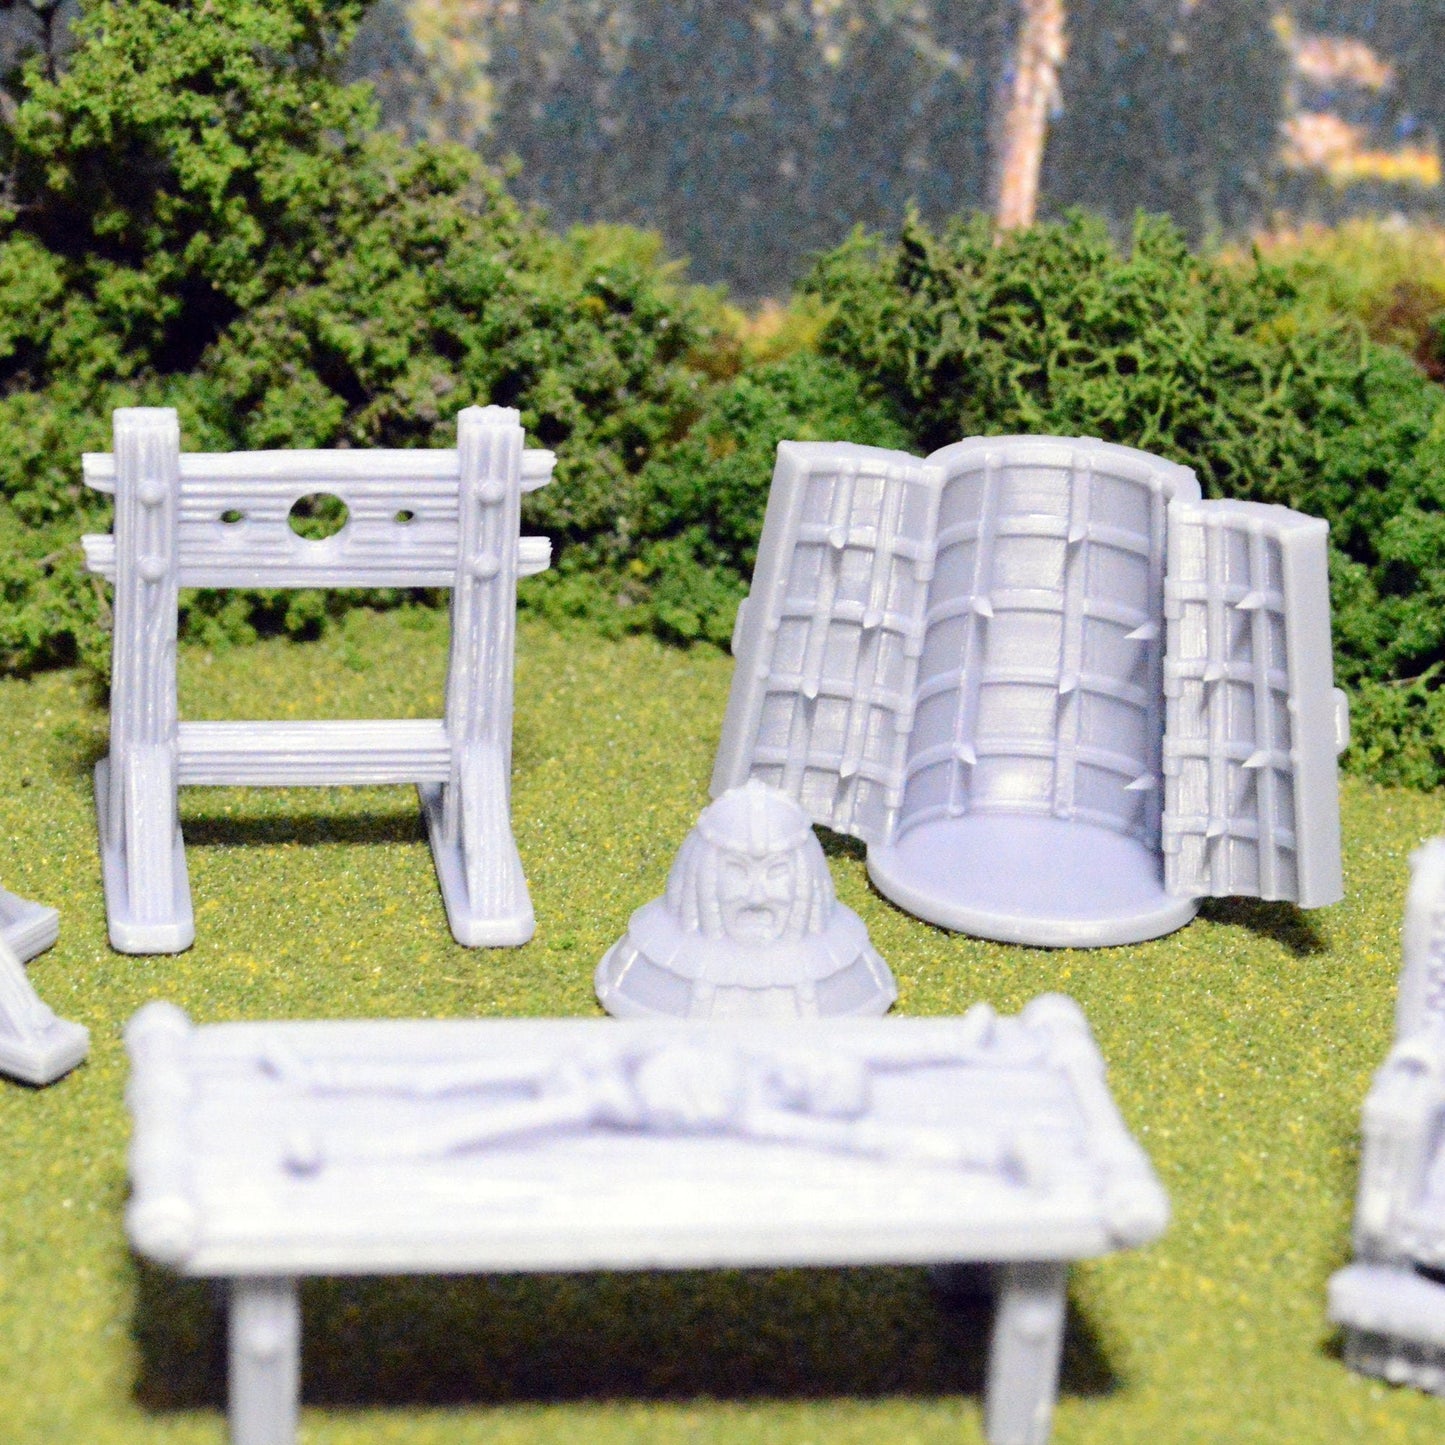 Torture Tools 15mm 28mm for D&D Terrain, DnD Pathfinder Dungeon Guardhouse